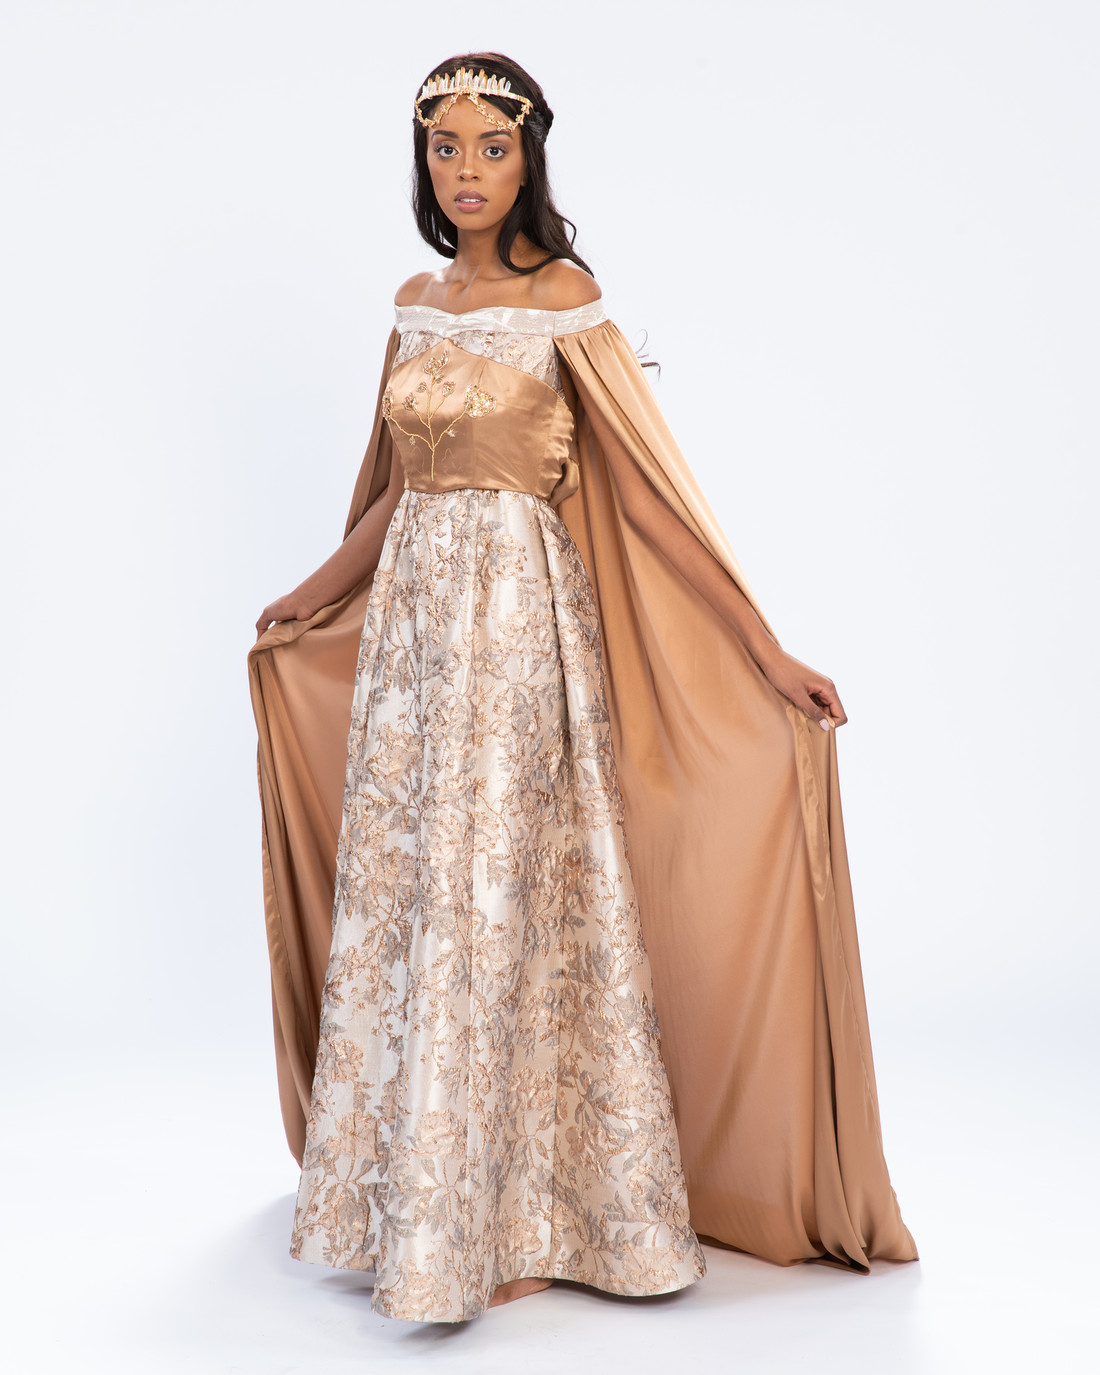 Woman wearing long gold dress with cape